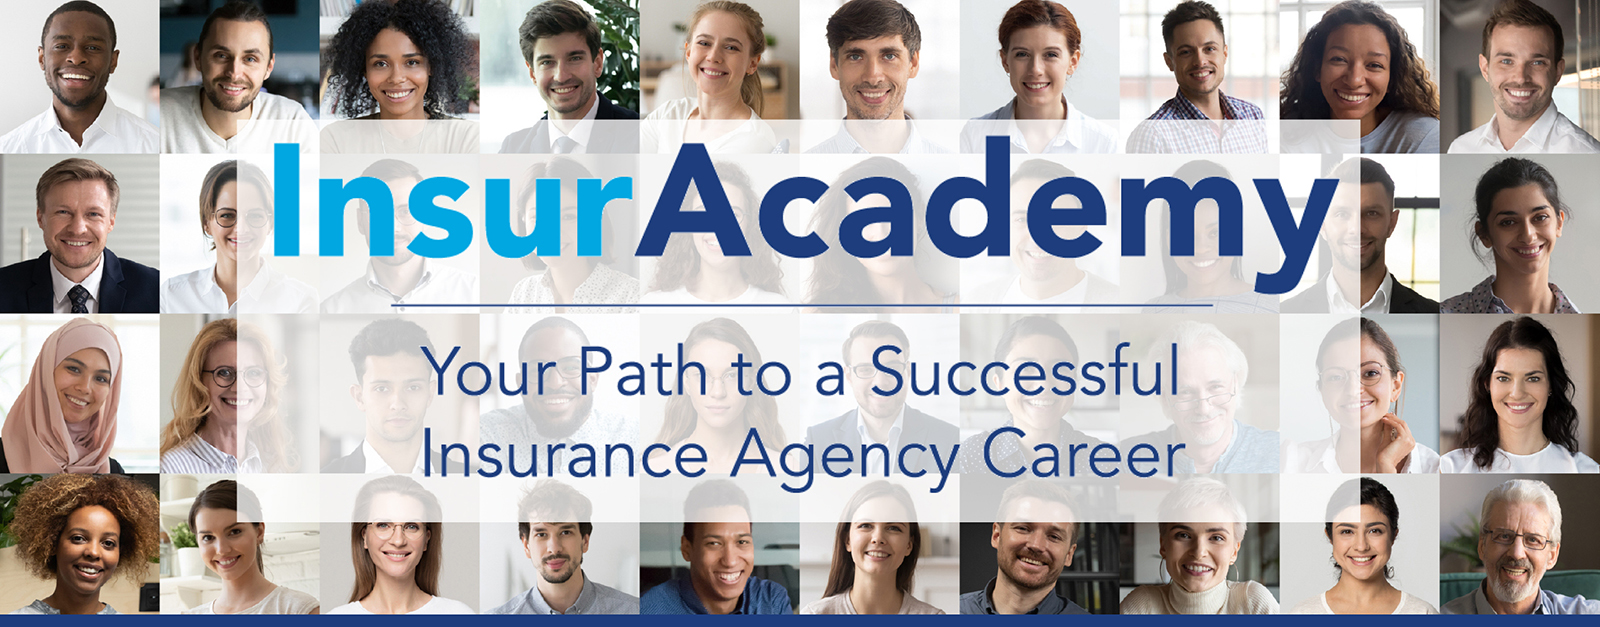 InsurAcademy is a path to a successful insurance agency career